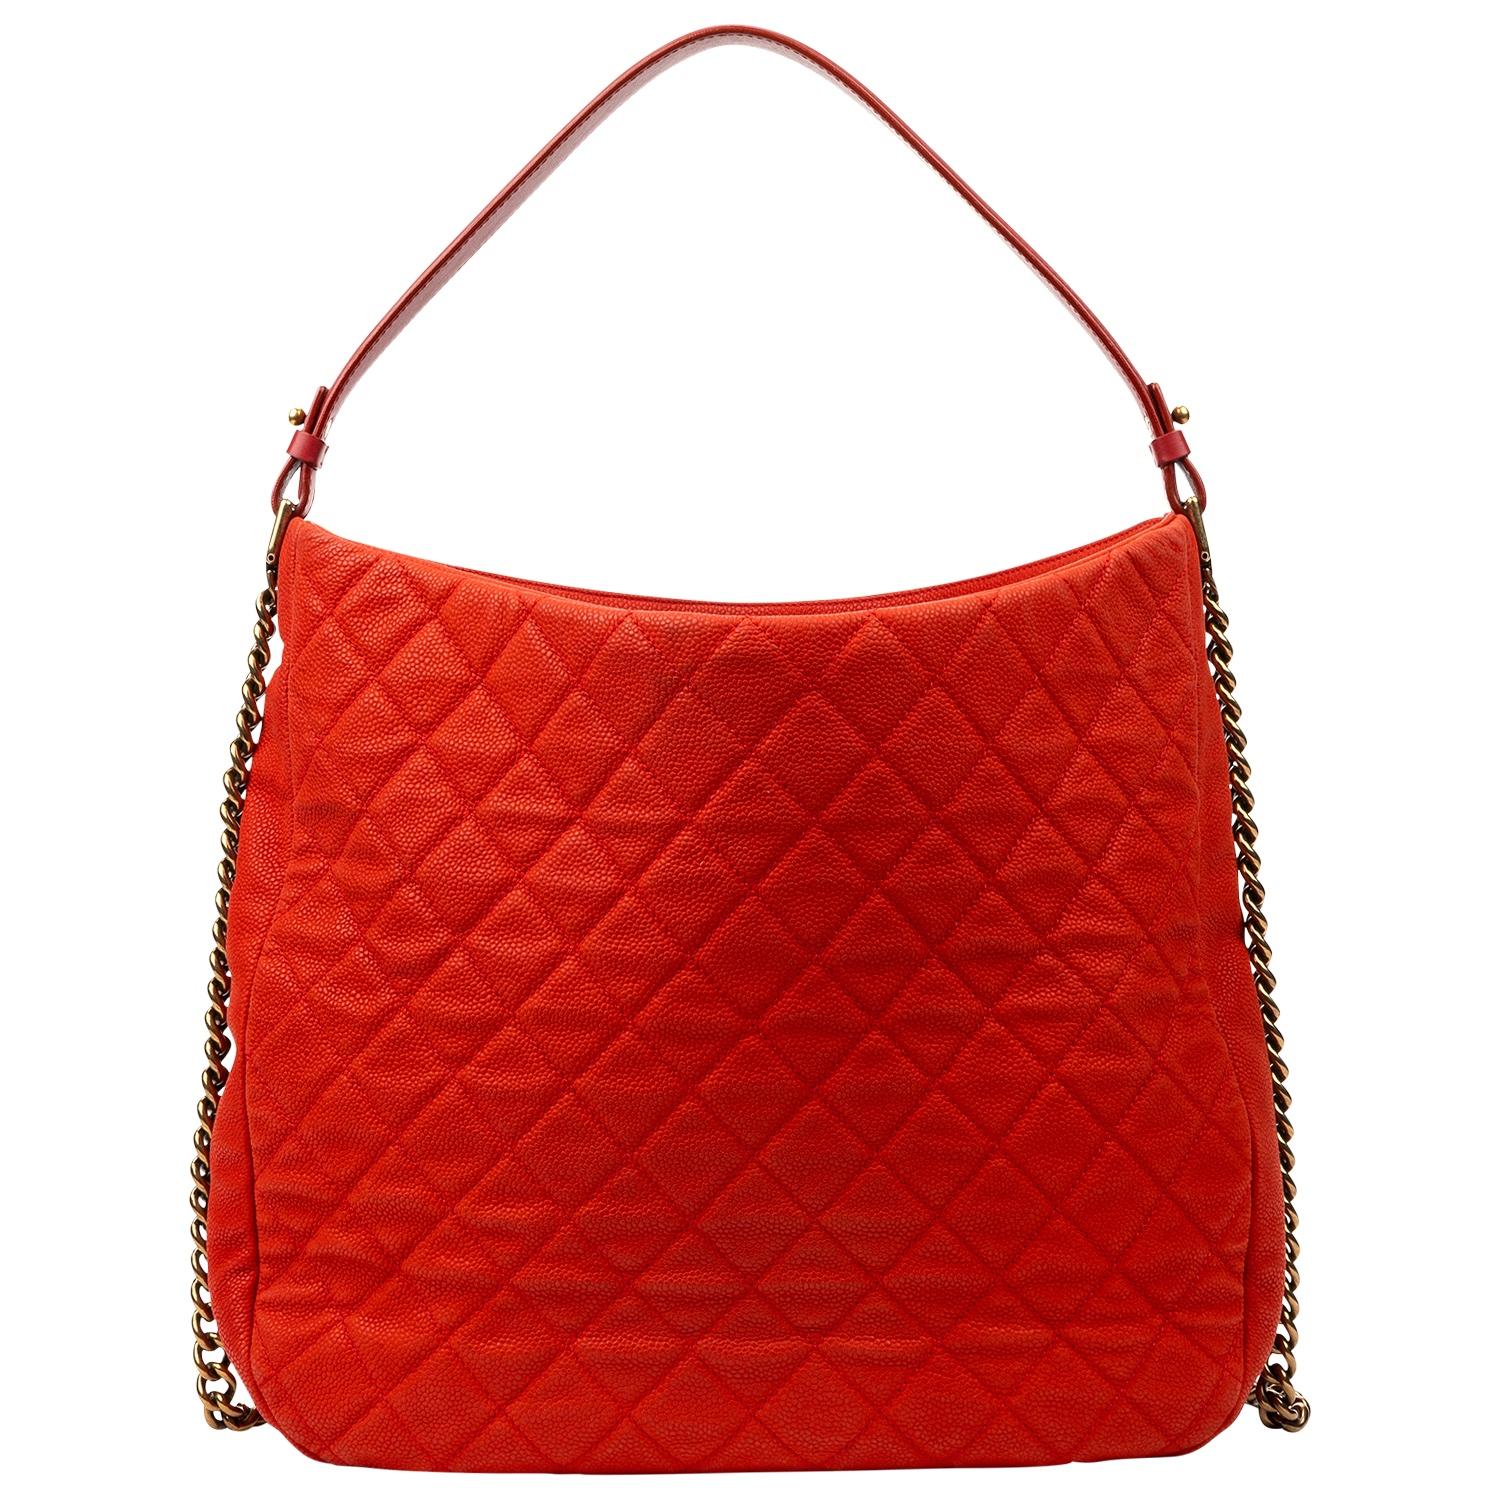 Chanel 2013 Cruise Collection Red Caviar Shopper In Excellent Condition For Sale In Atlanta, GA